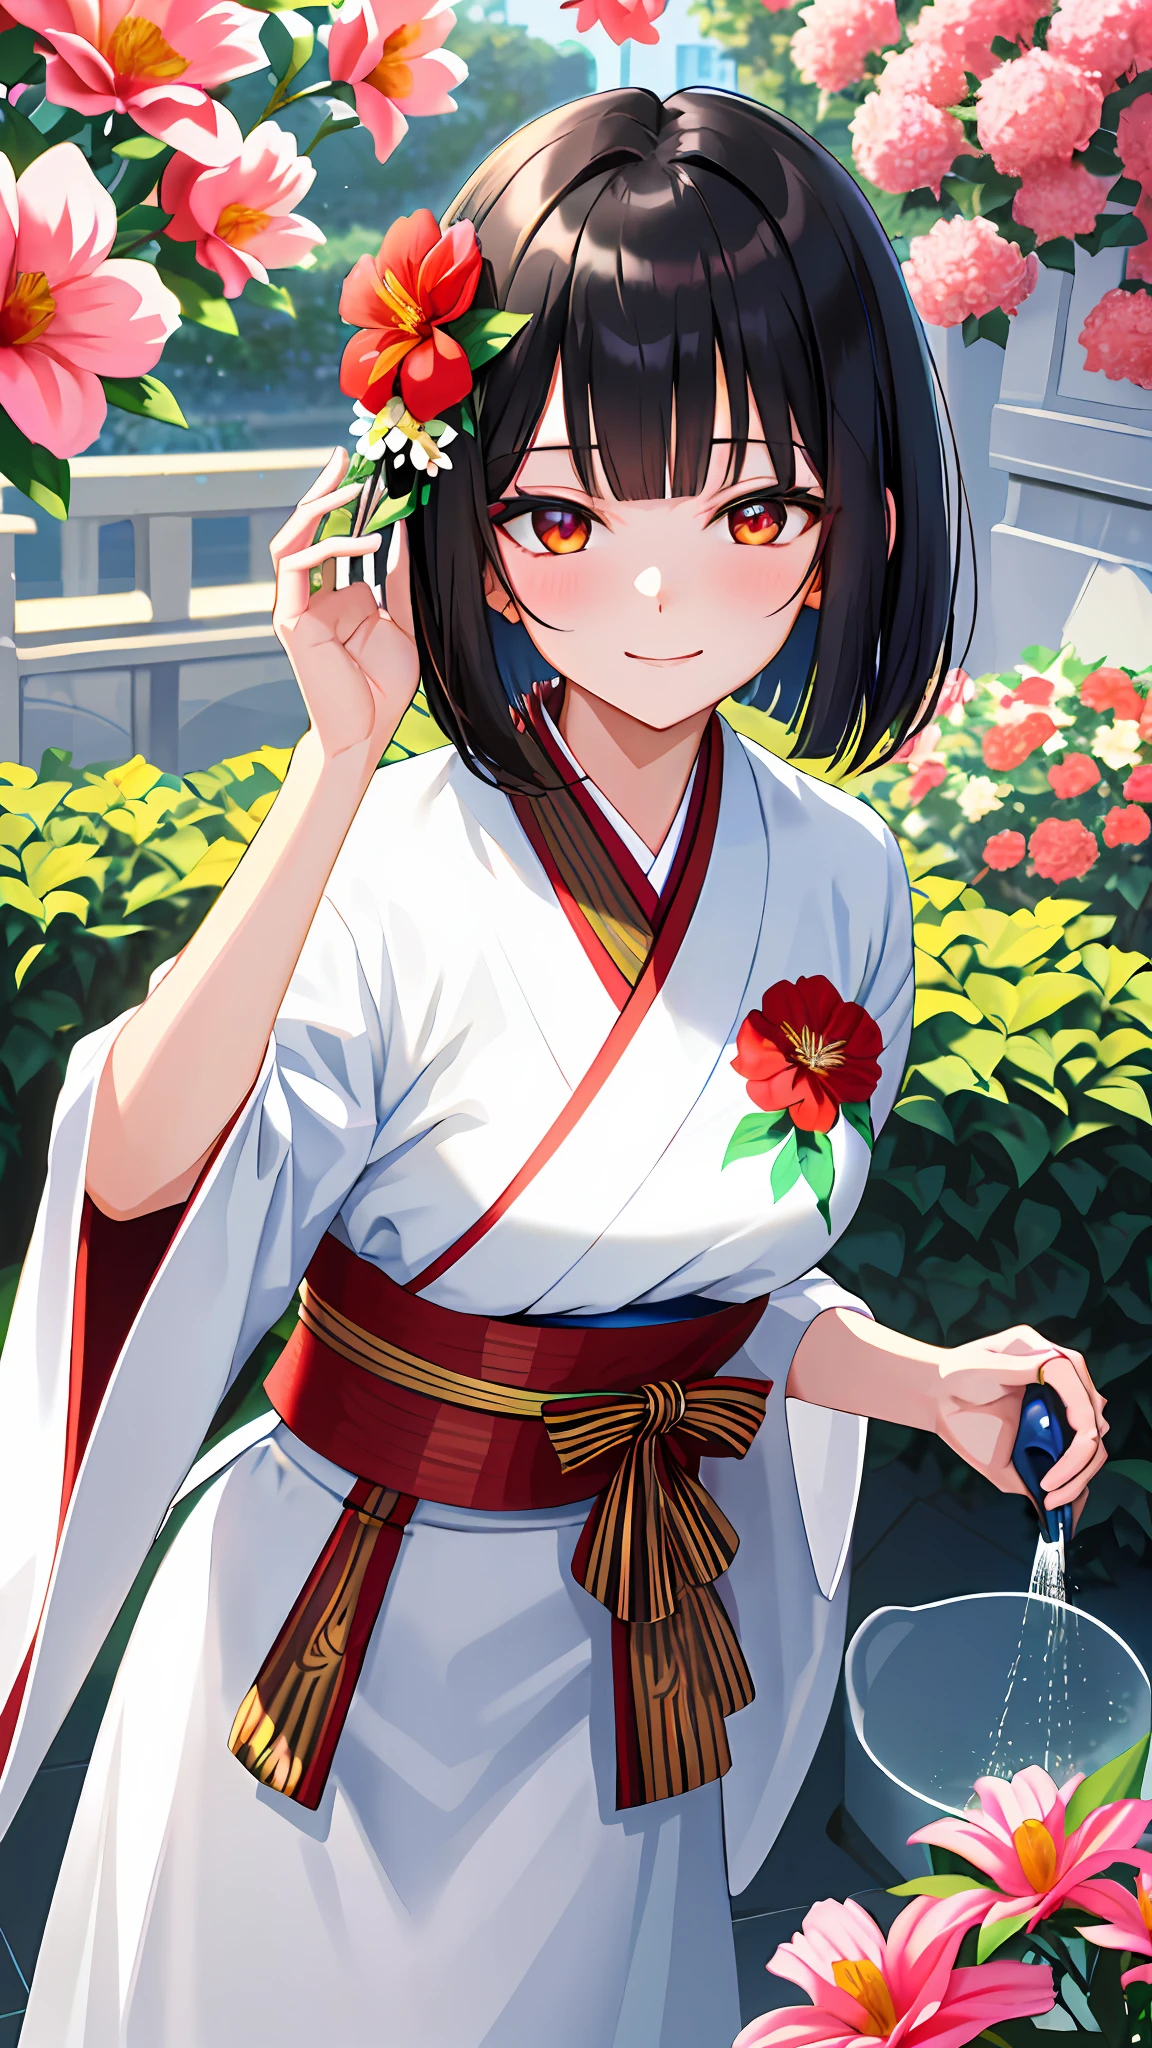 (highest quality), ultra high definition, high definition, ((masterpiece)), animation, 18 years old anime woman, white and beautiful skin, beauty, beautiful black hair, bob cut, red flower hair ornament, beautiful red color eyes, smiling kindly, white and gorgeous floral kimono, detailed florist, upper body, kpop idol, girl alone, big, cute face, watering flowers with a watering can, kind eyes,